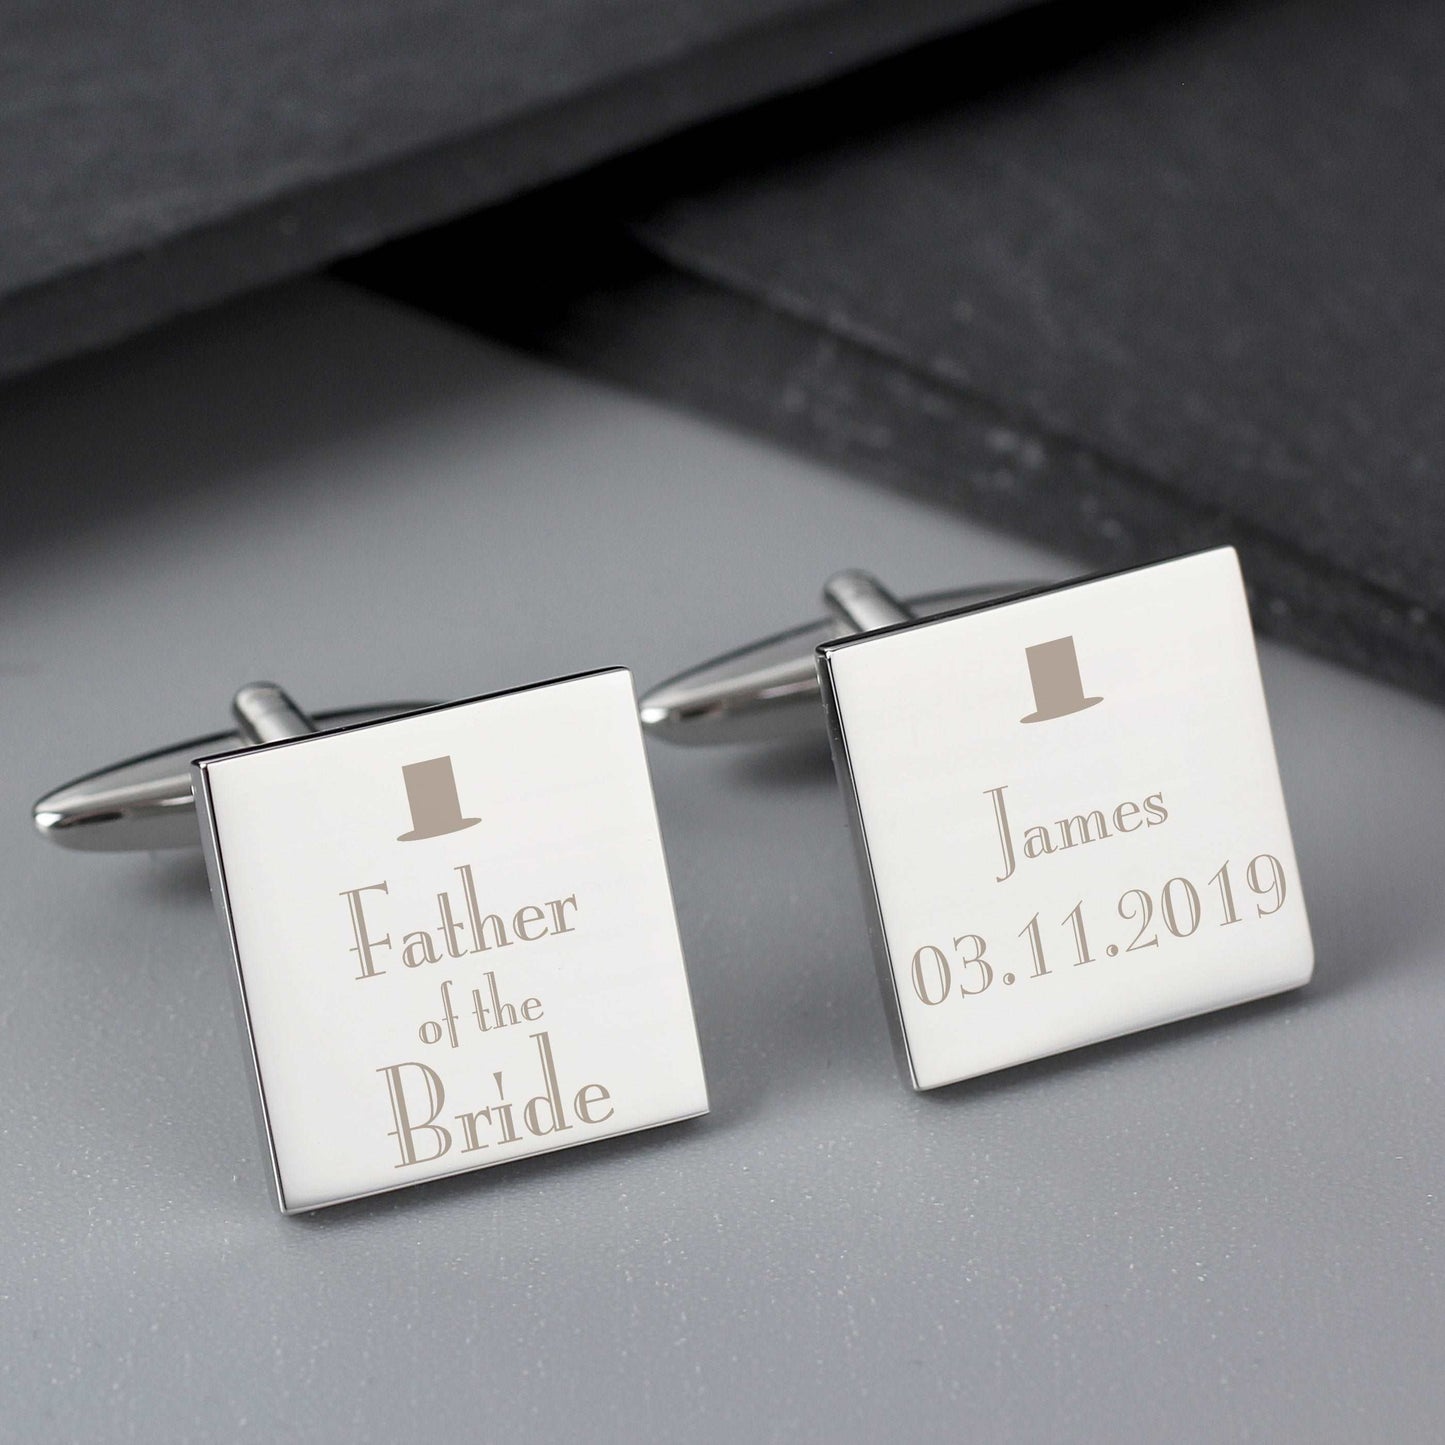 Decorative Wedding Father of the Bride Square Cufflinks personalised 